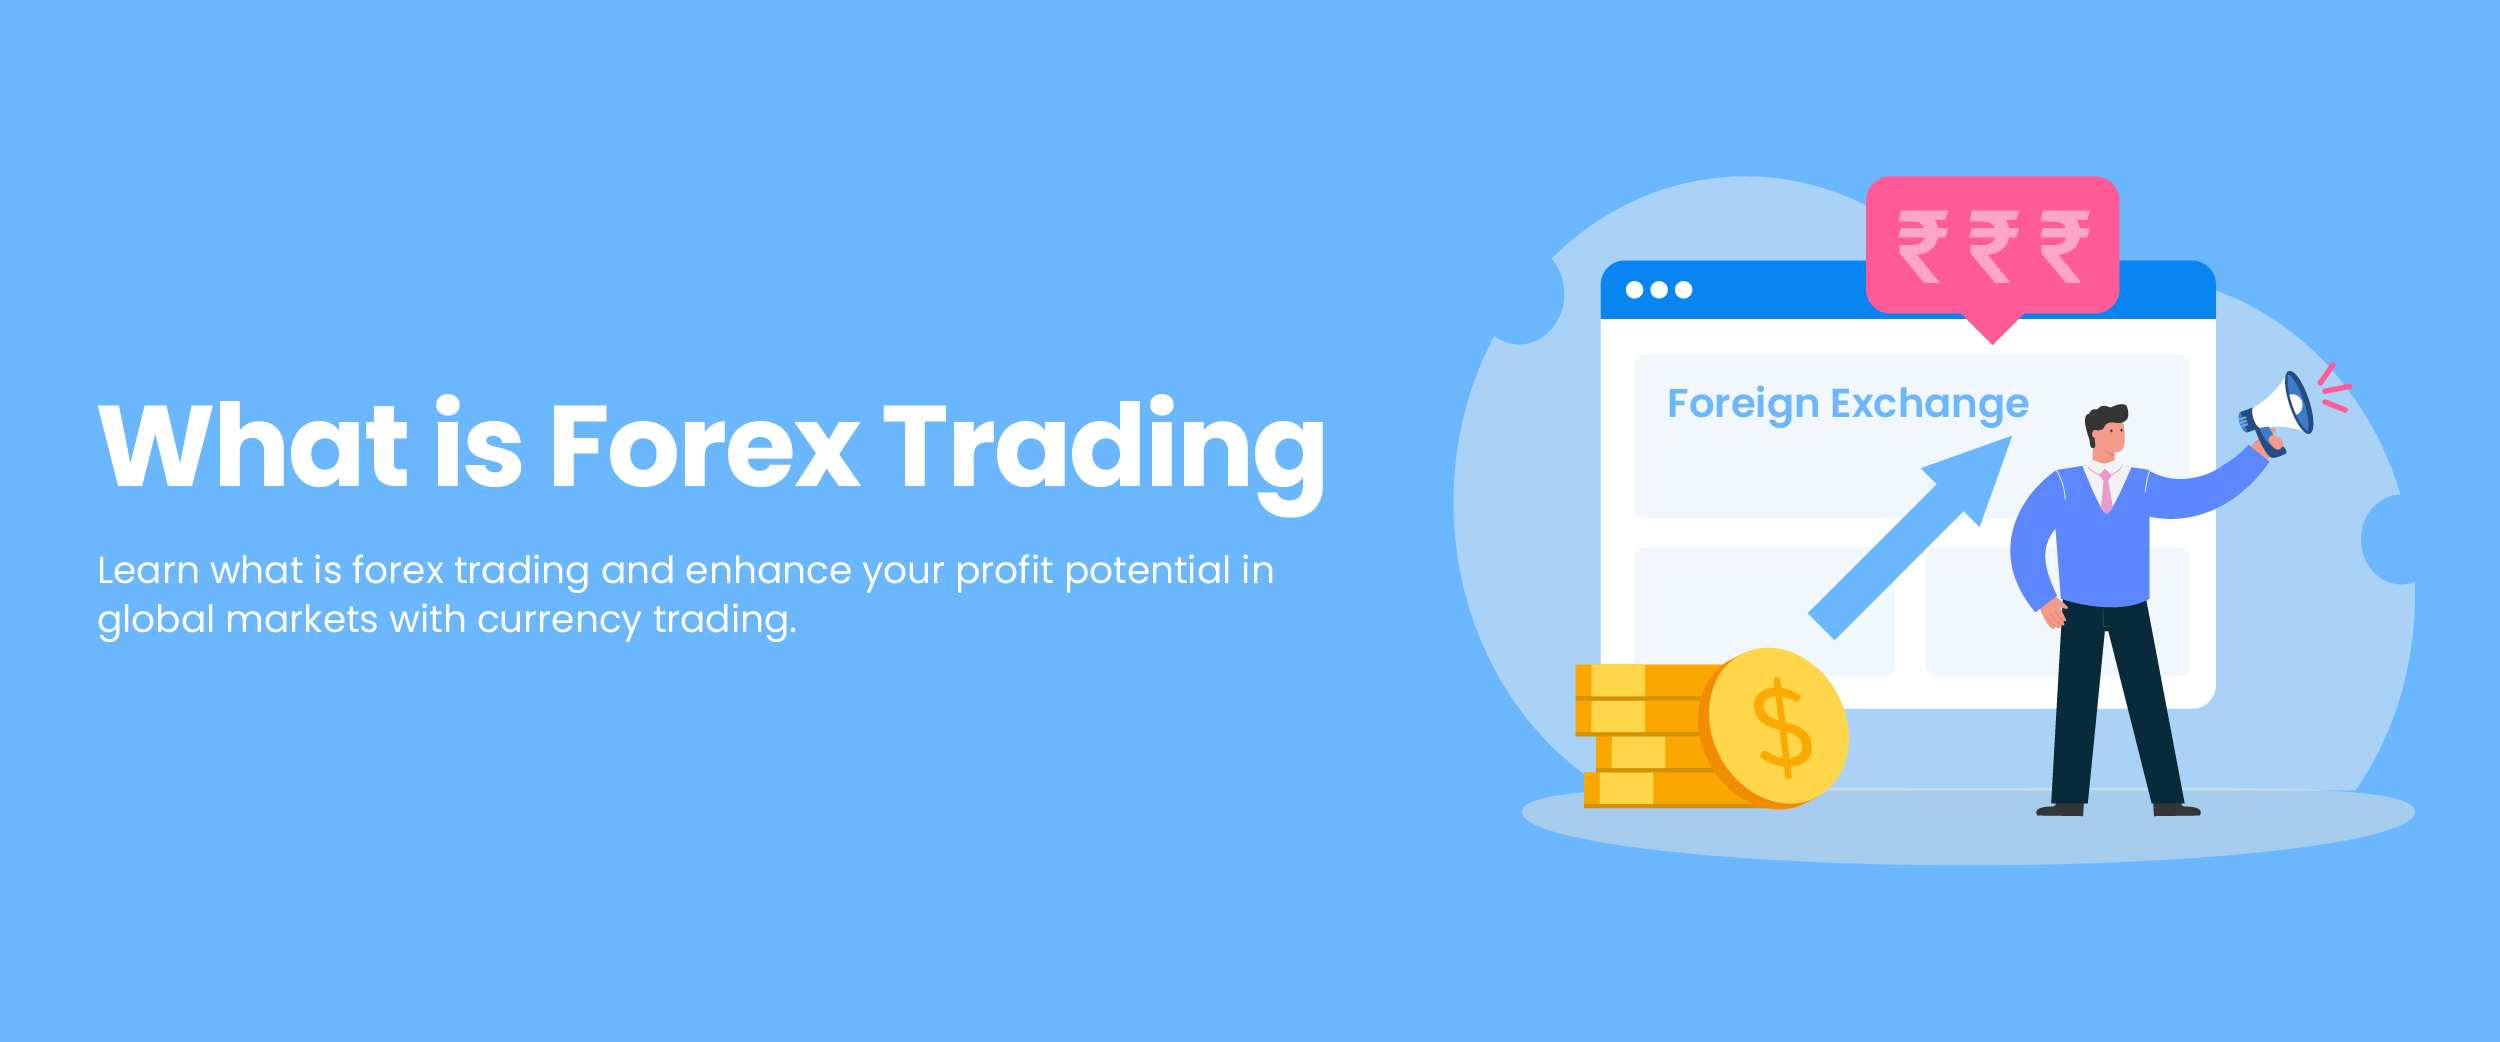 Forex Robot Programming: How to Build Your Own Trading Robot